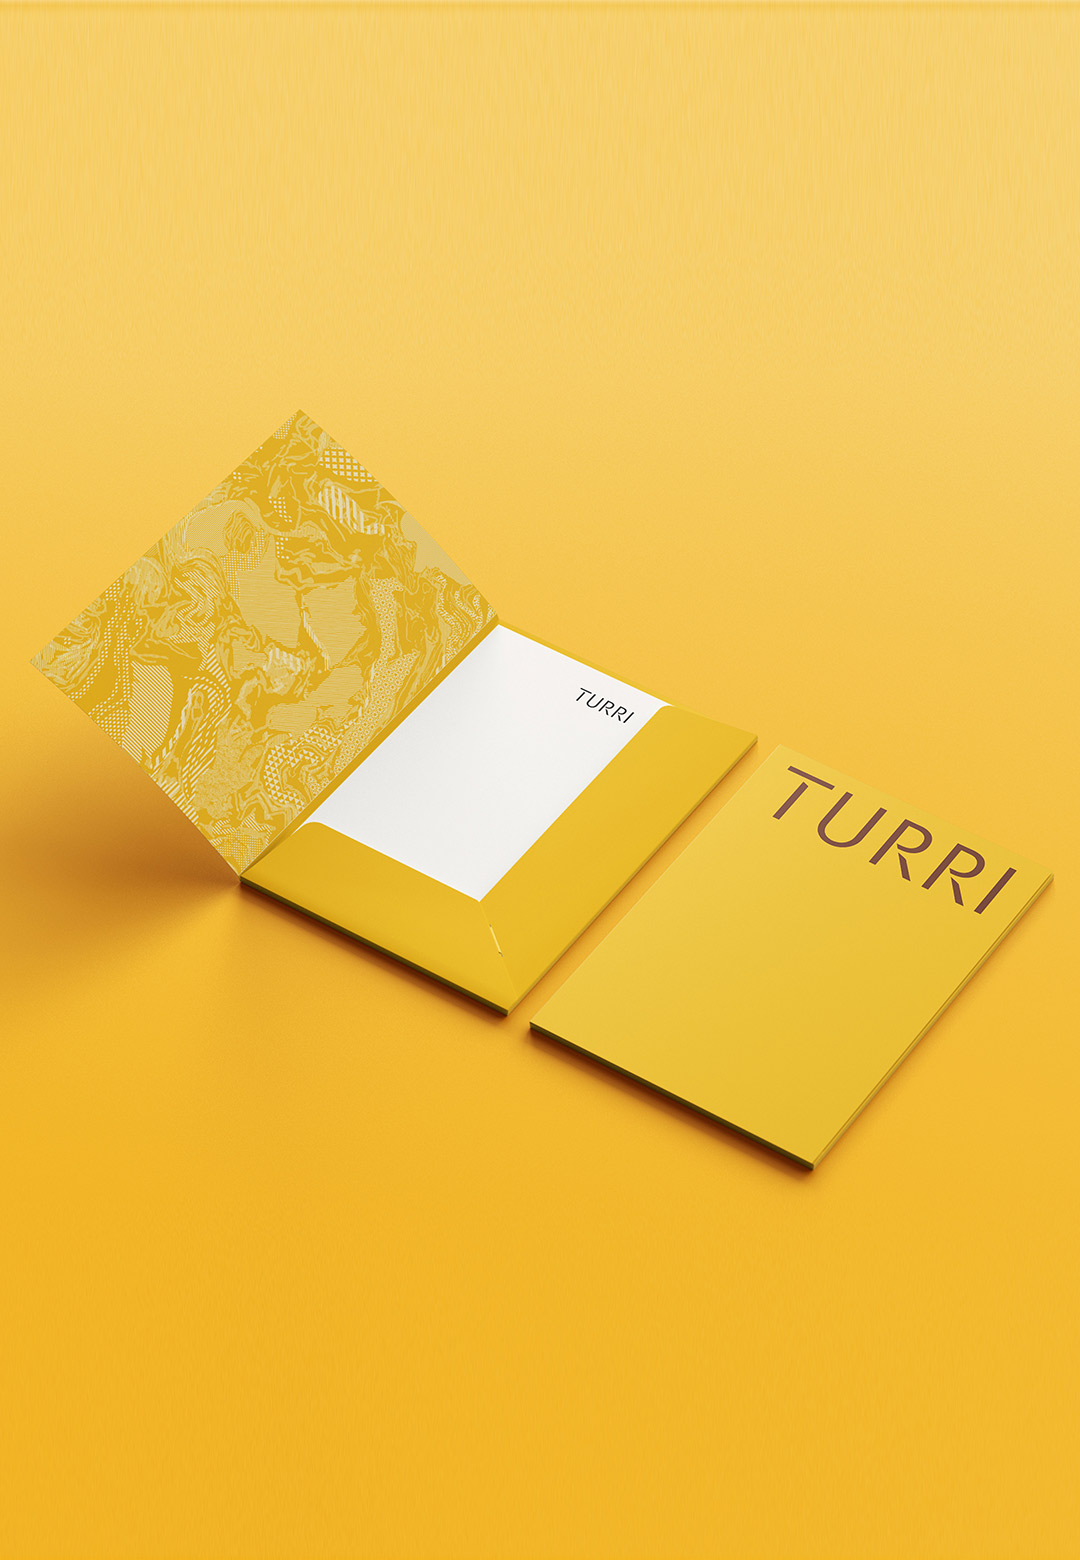 Turri redefines its identity with innovative, elegant, and unique living spaces